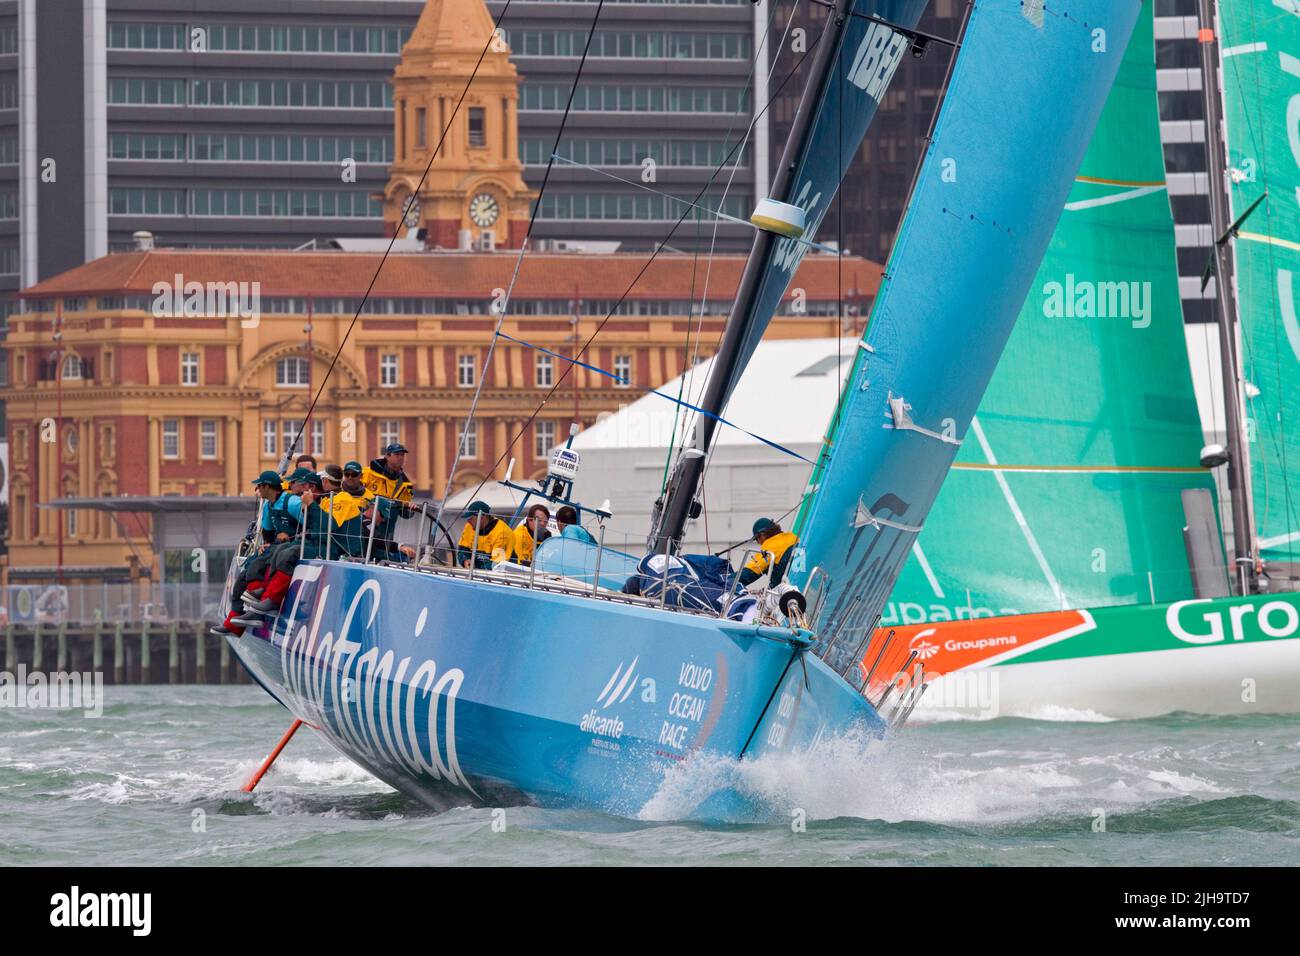 Team Telefonica followed by Groupama Sailing Team depart the harbour for leg 5 to Itajai, Brazil as part of the Volvo Ocean Race, Auckland, New Zealan Stock Photo